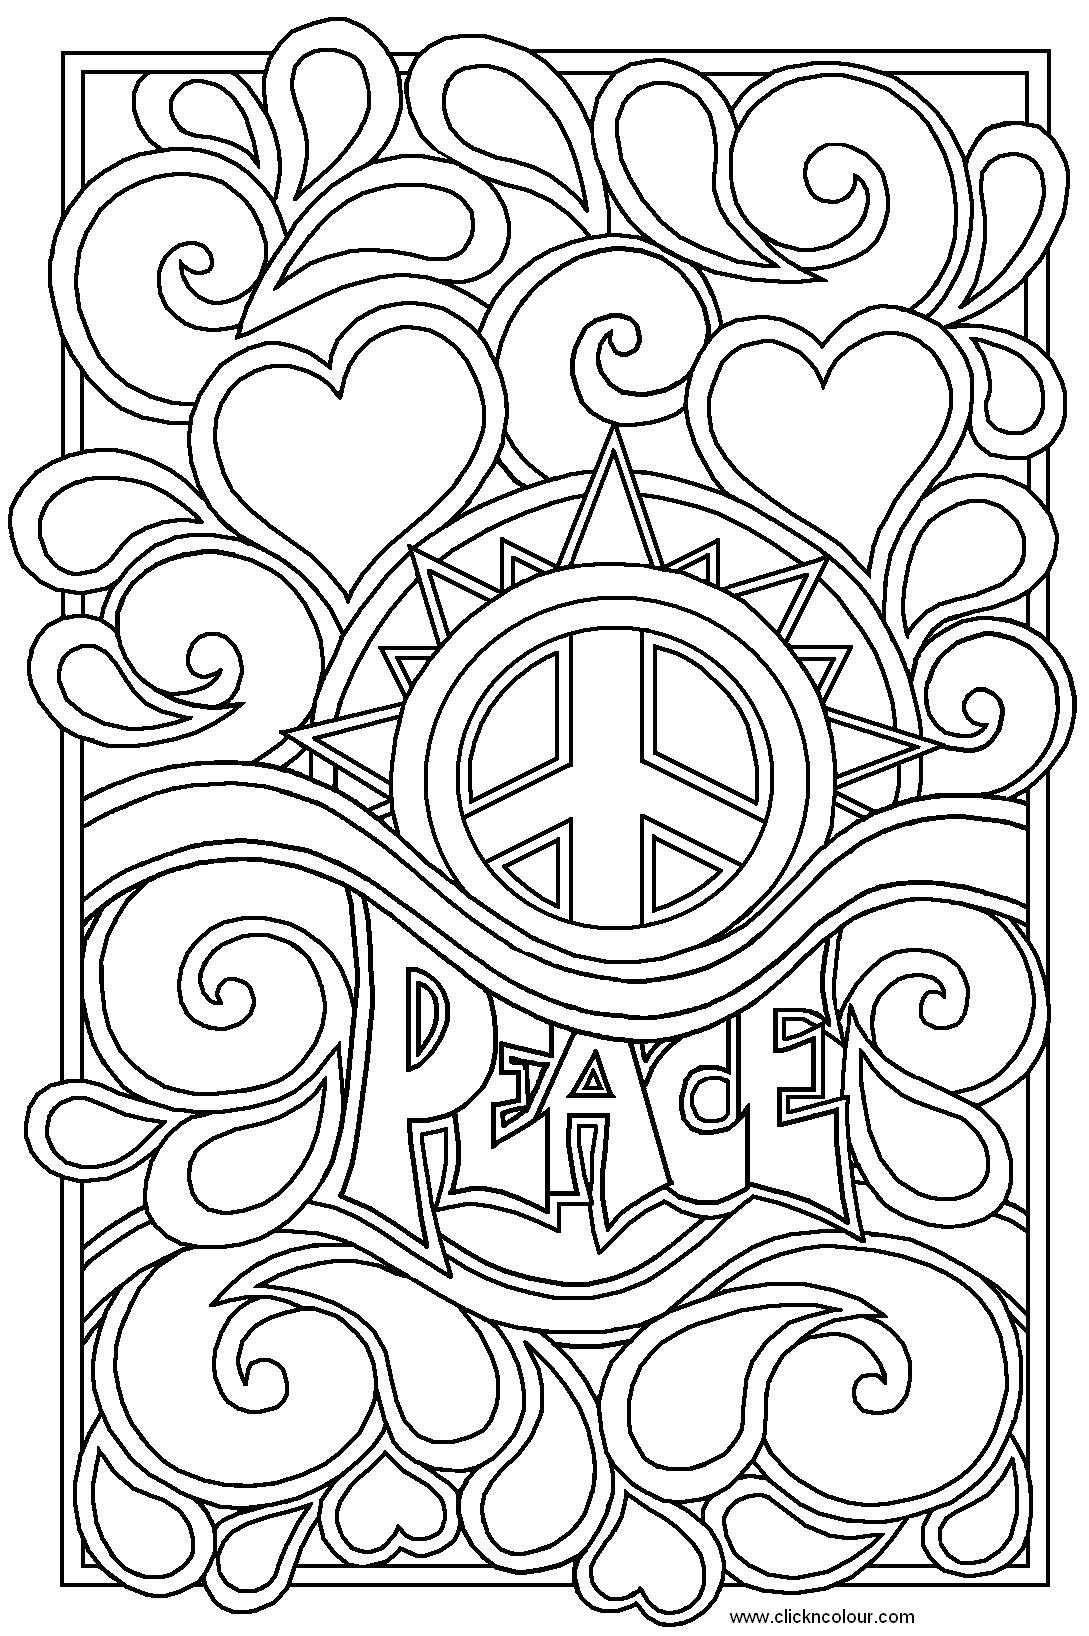 Fun Coloring Pages For Adults
 Fun Coloring Pages For Older Kids